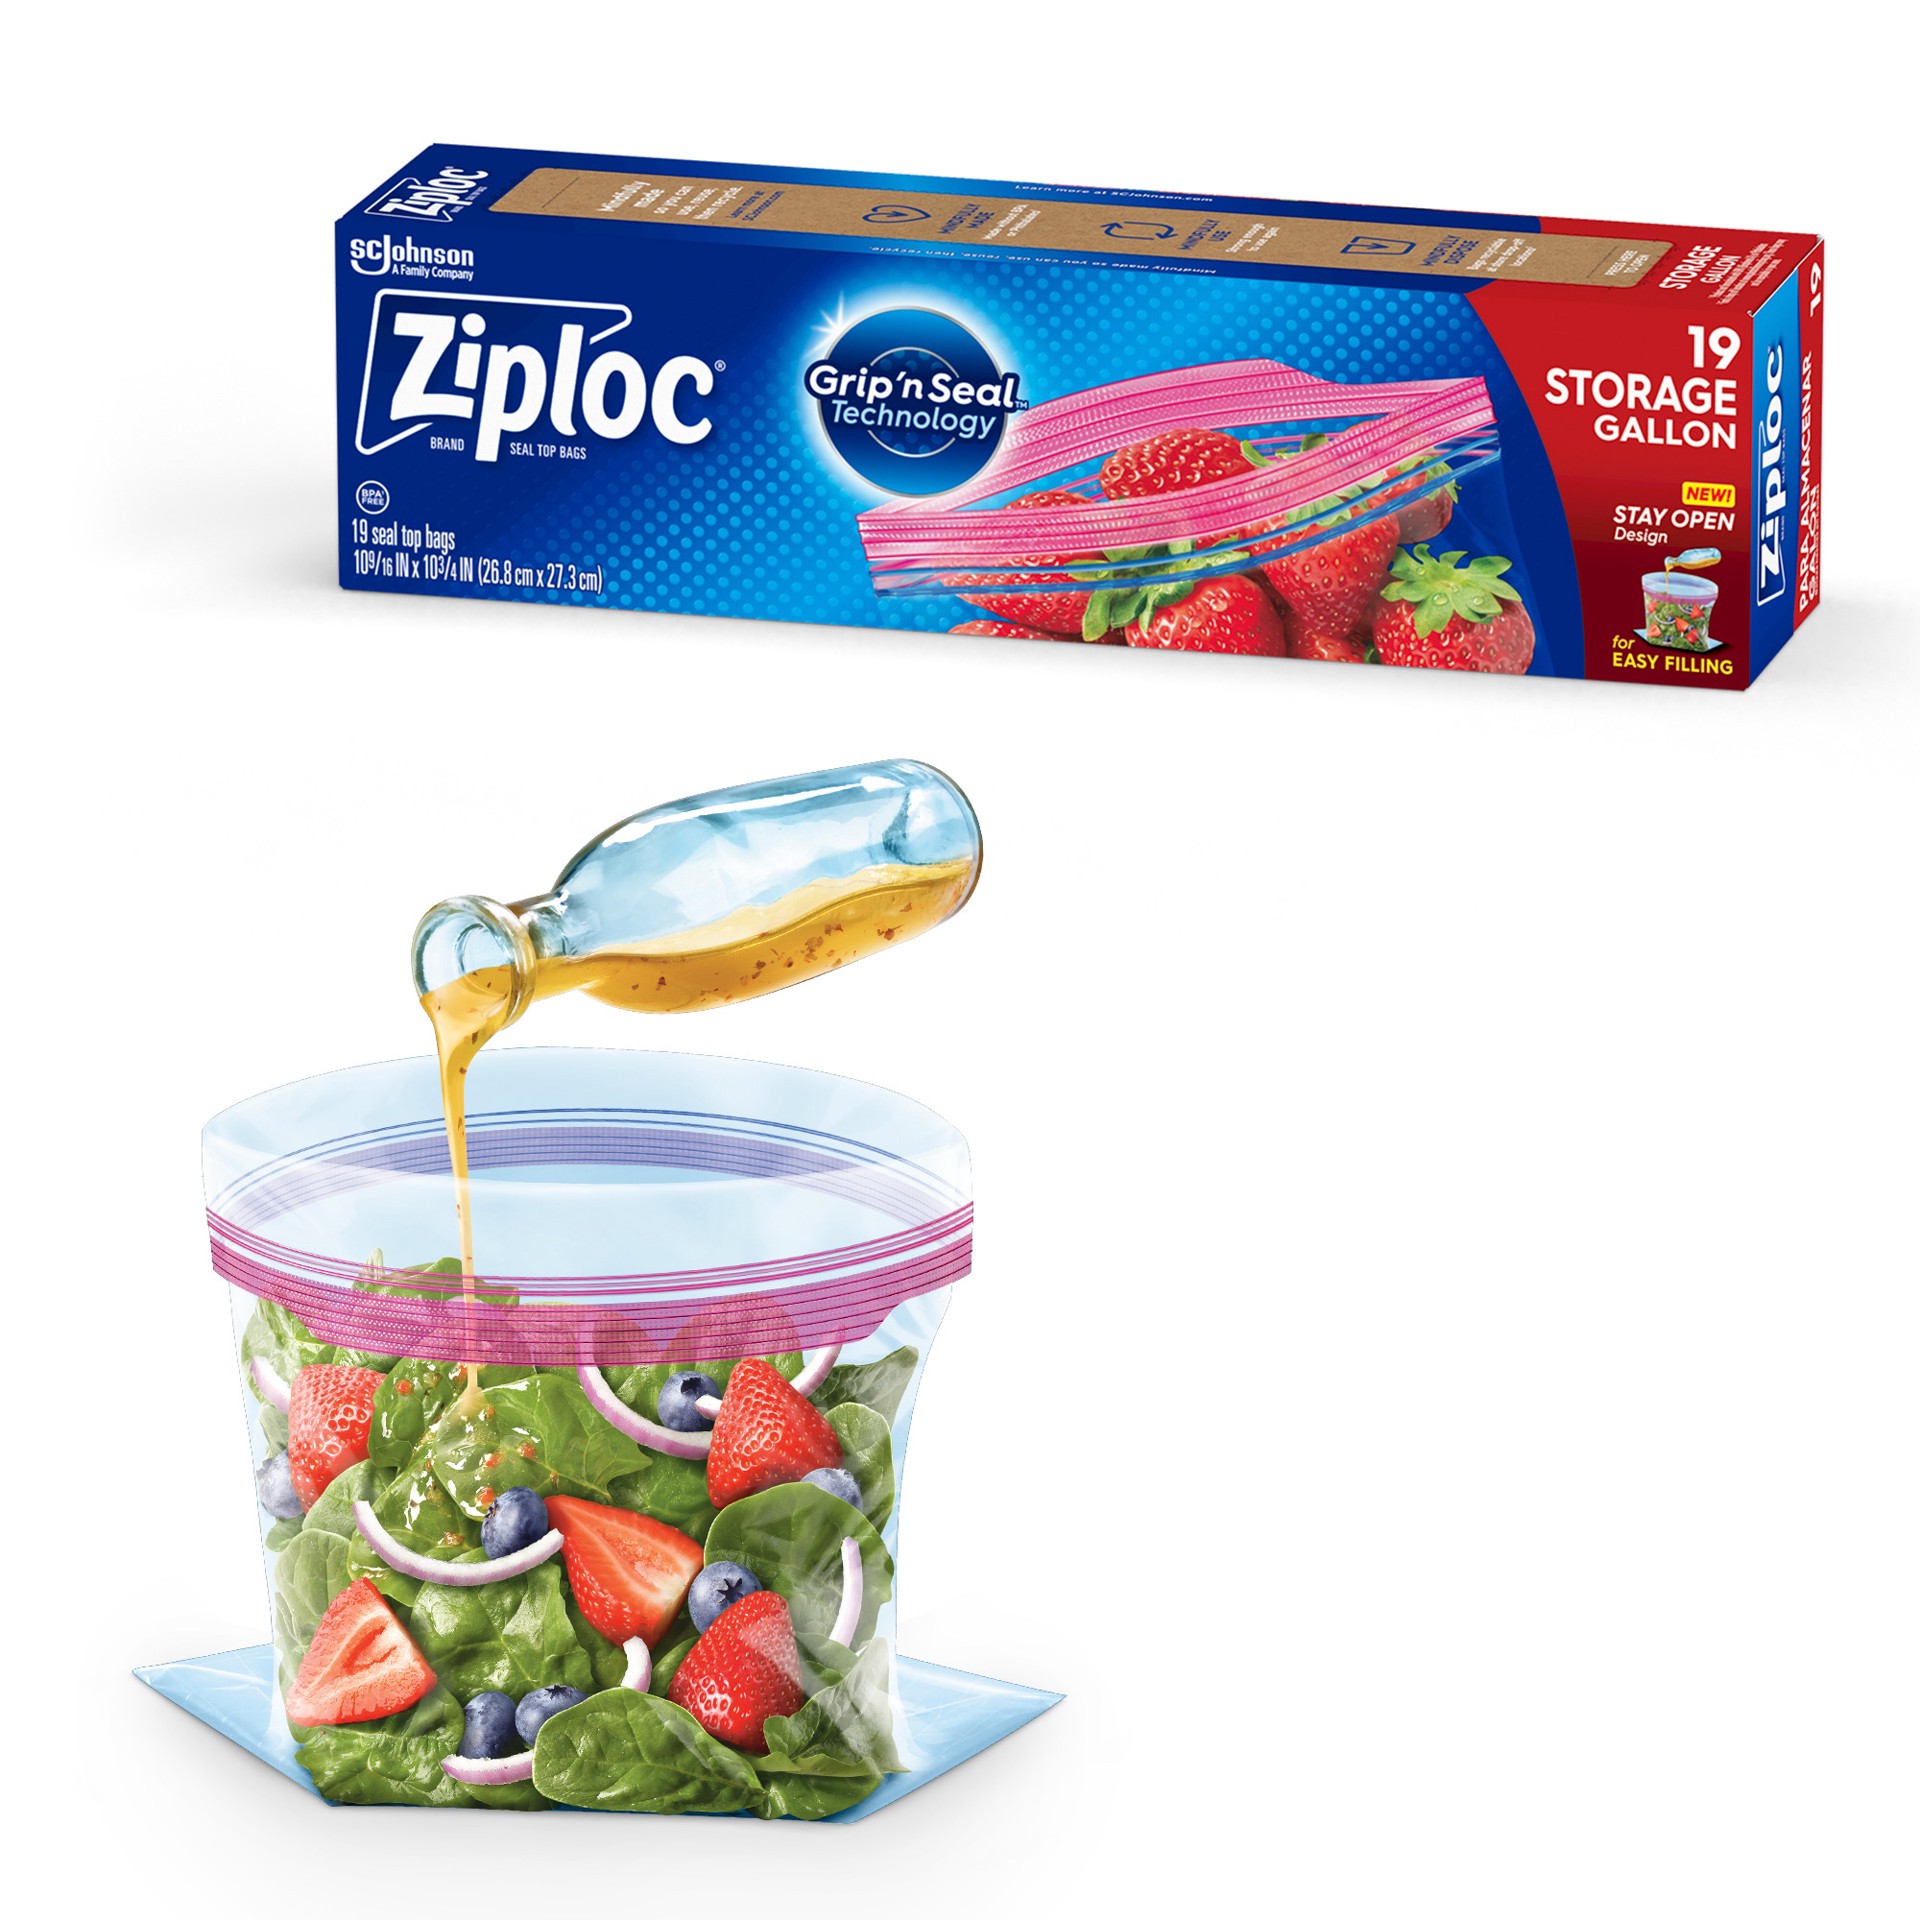 slide 4 of 5, Ziploc Brand Storage Bags with New Stay Open Design, Gallon, 19 Count, Patented Stand-up Bottom, Easy to Fill Food Storage Bags, Unloc a Free Set of Hands in the Kitchen, Microwave Safe, BPA Free, 19 ct